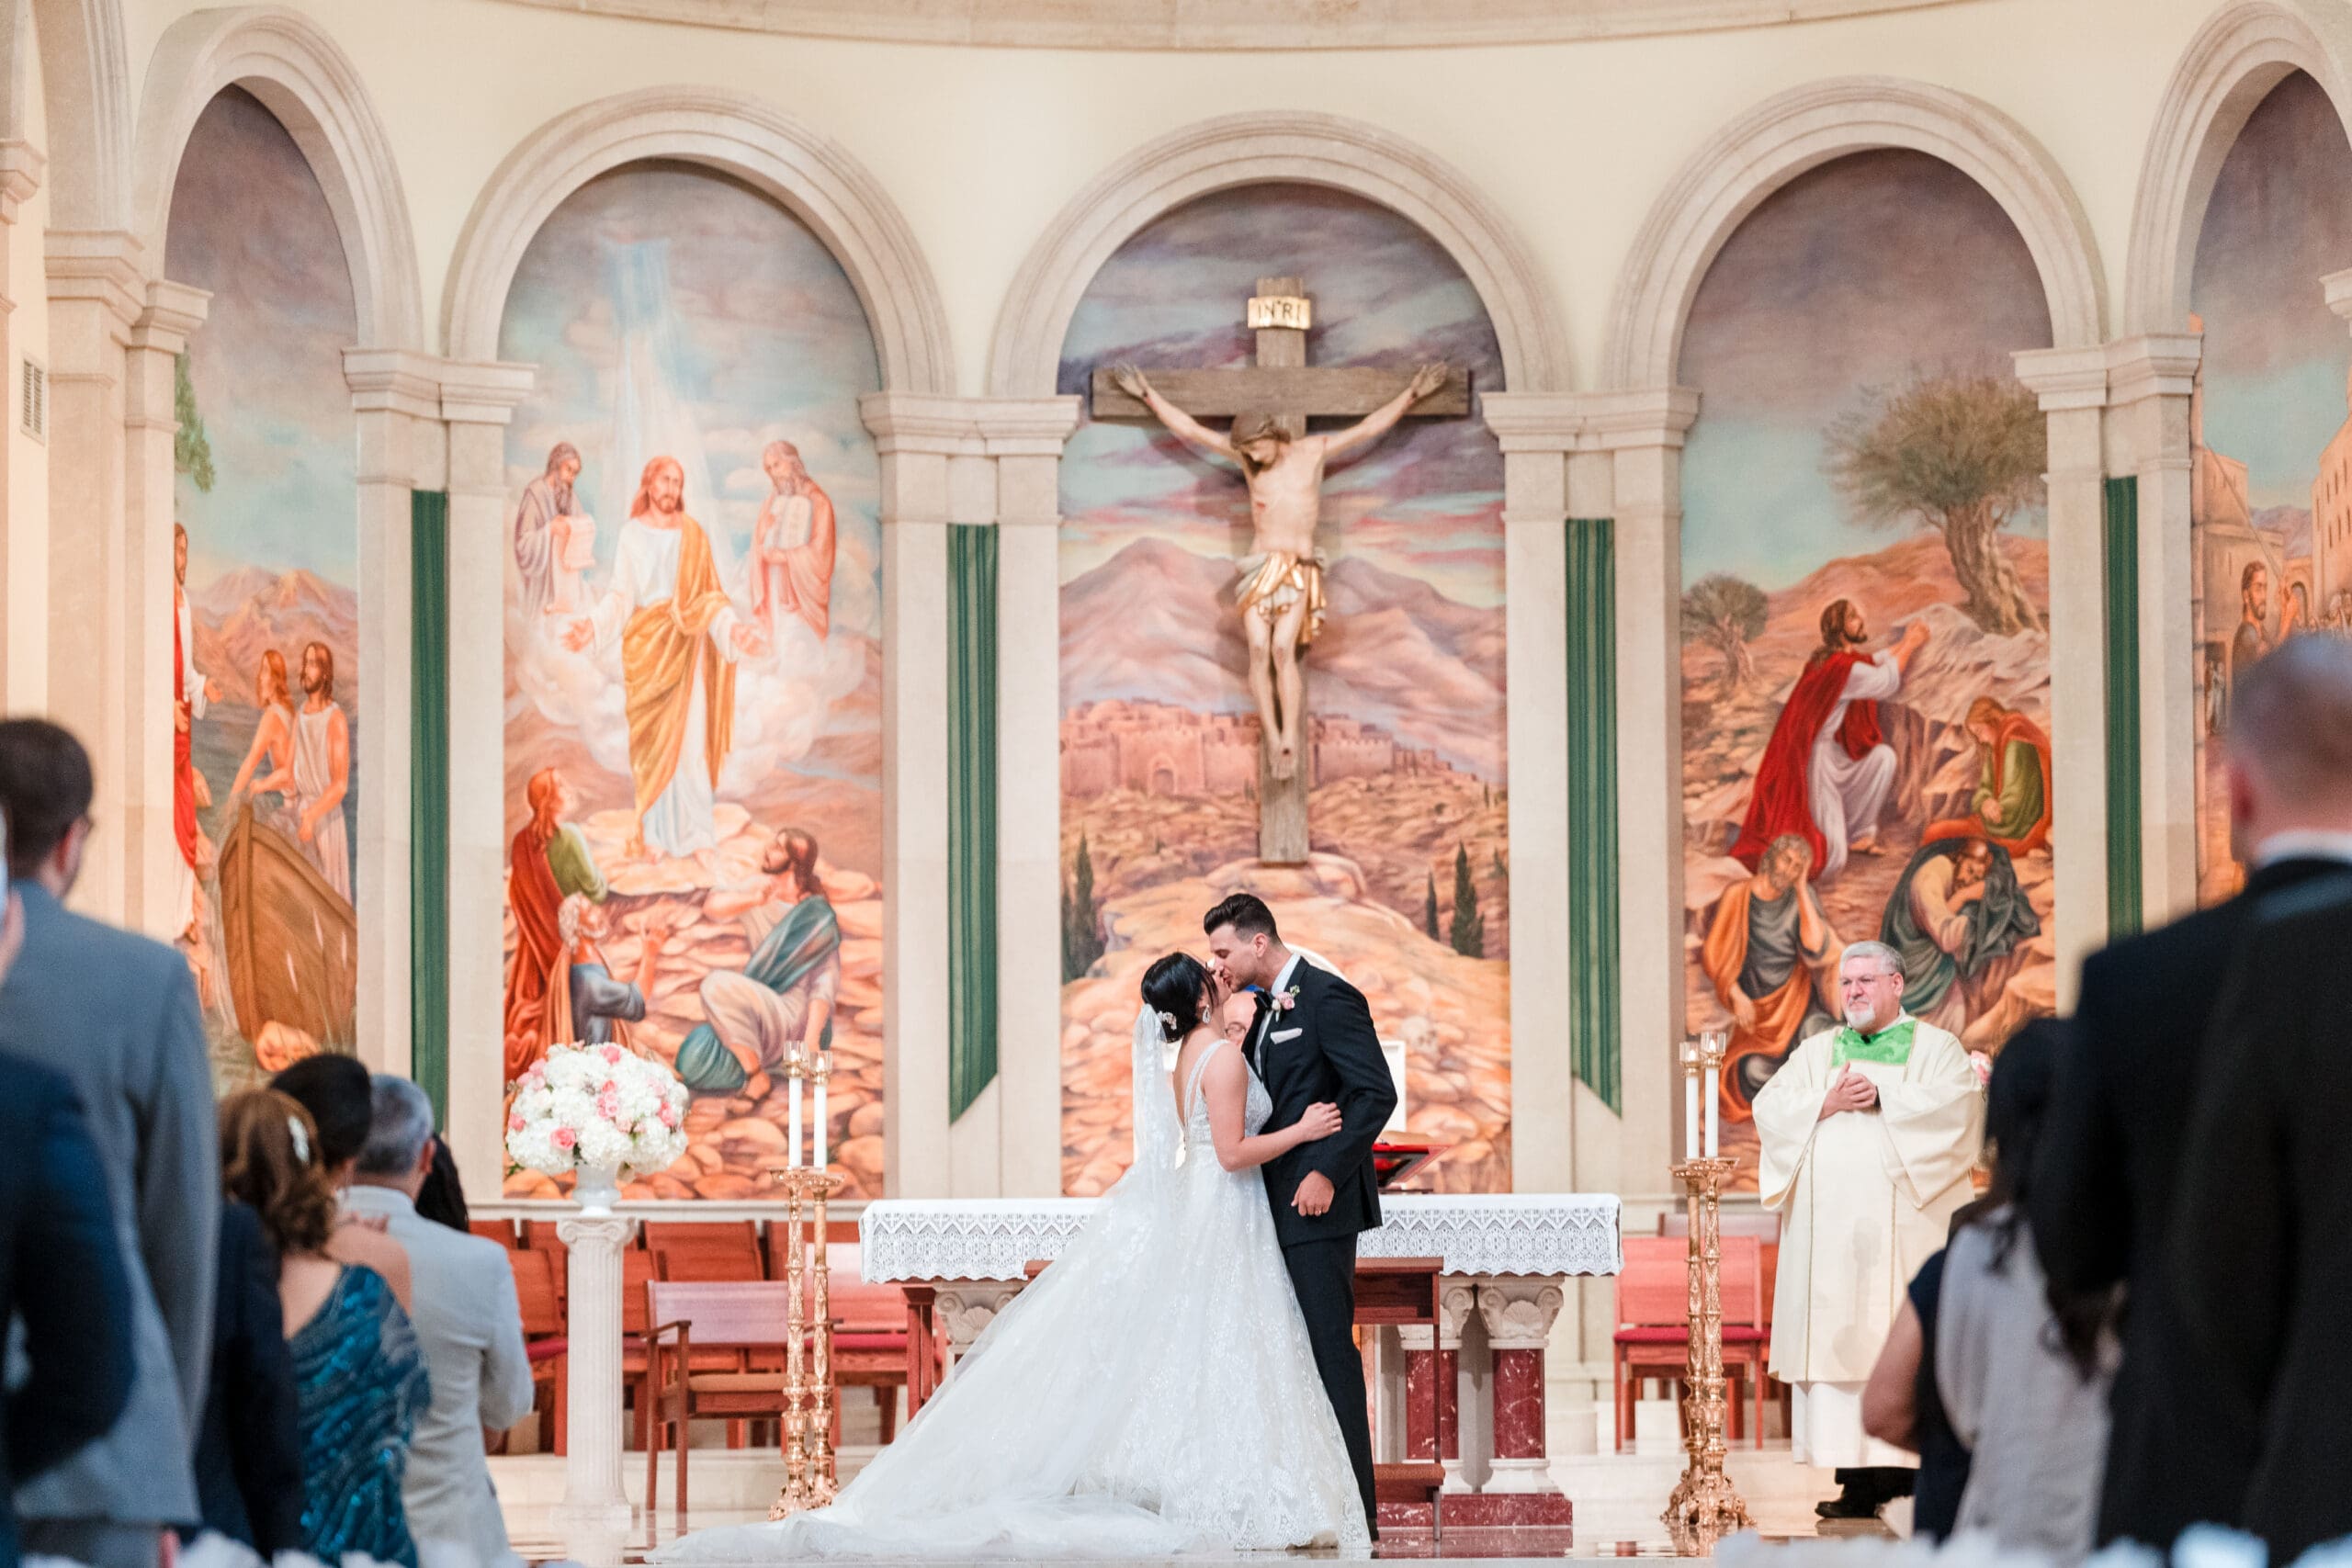 Wide shot capturing the big kiss at the altar of St. James Cathedral, with the priest, guests, and cathedral artwork in the background.